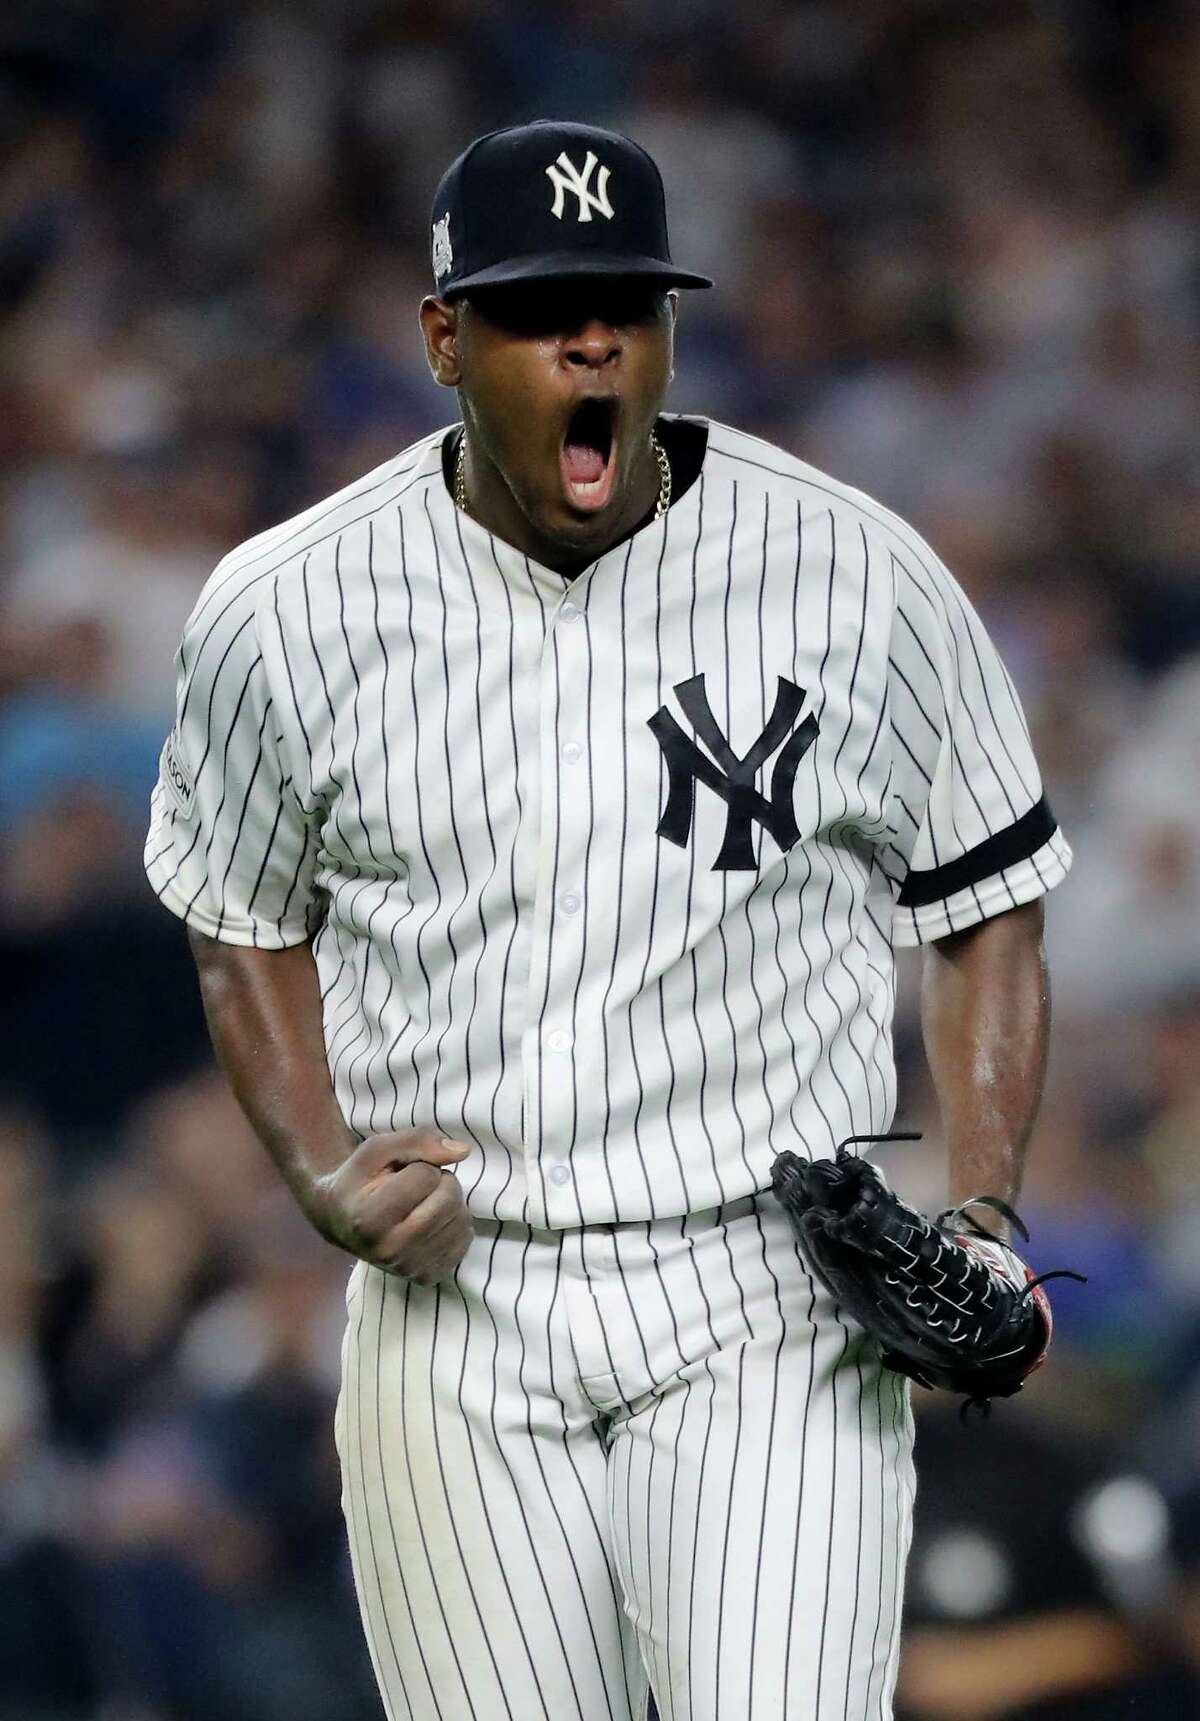 Yankees' Luis Severino: 'I want to be a Yankee for life' as